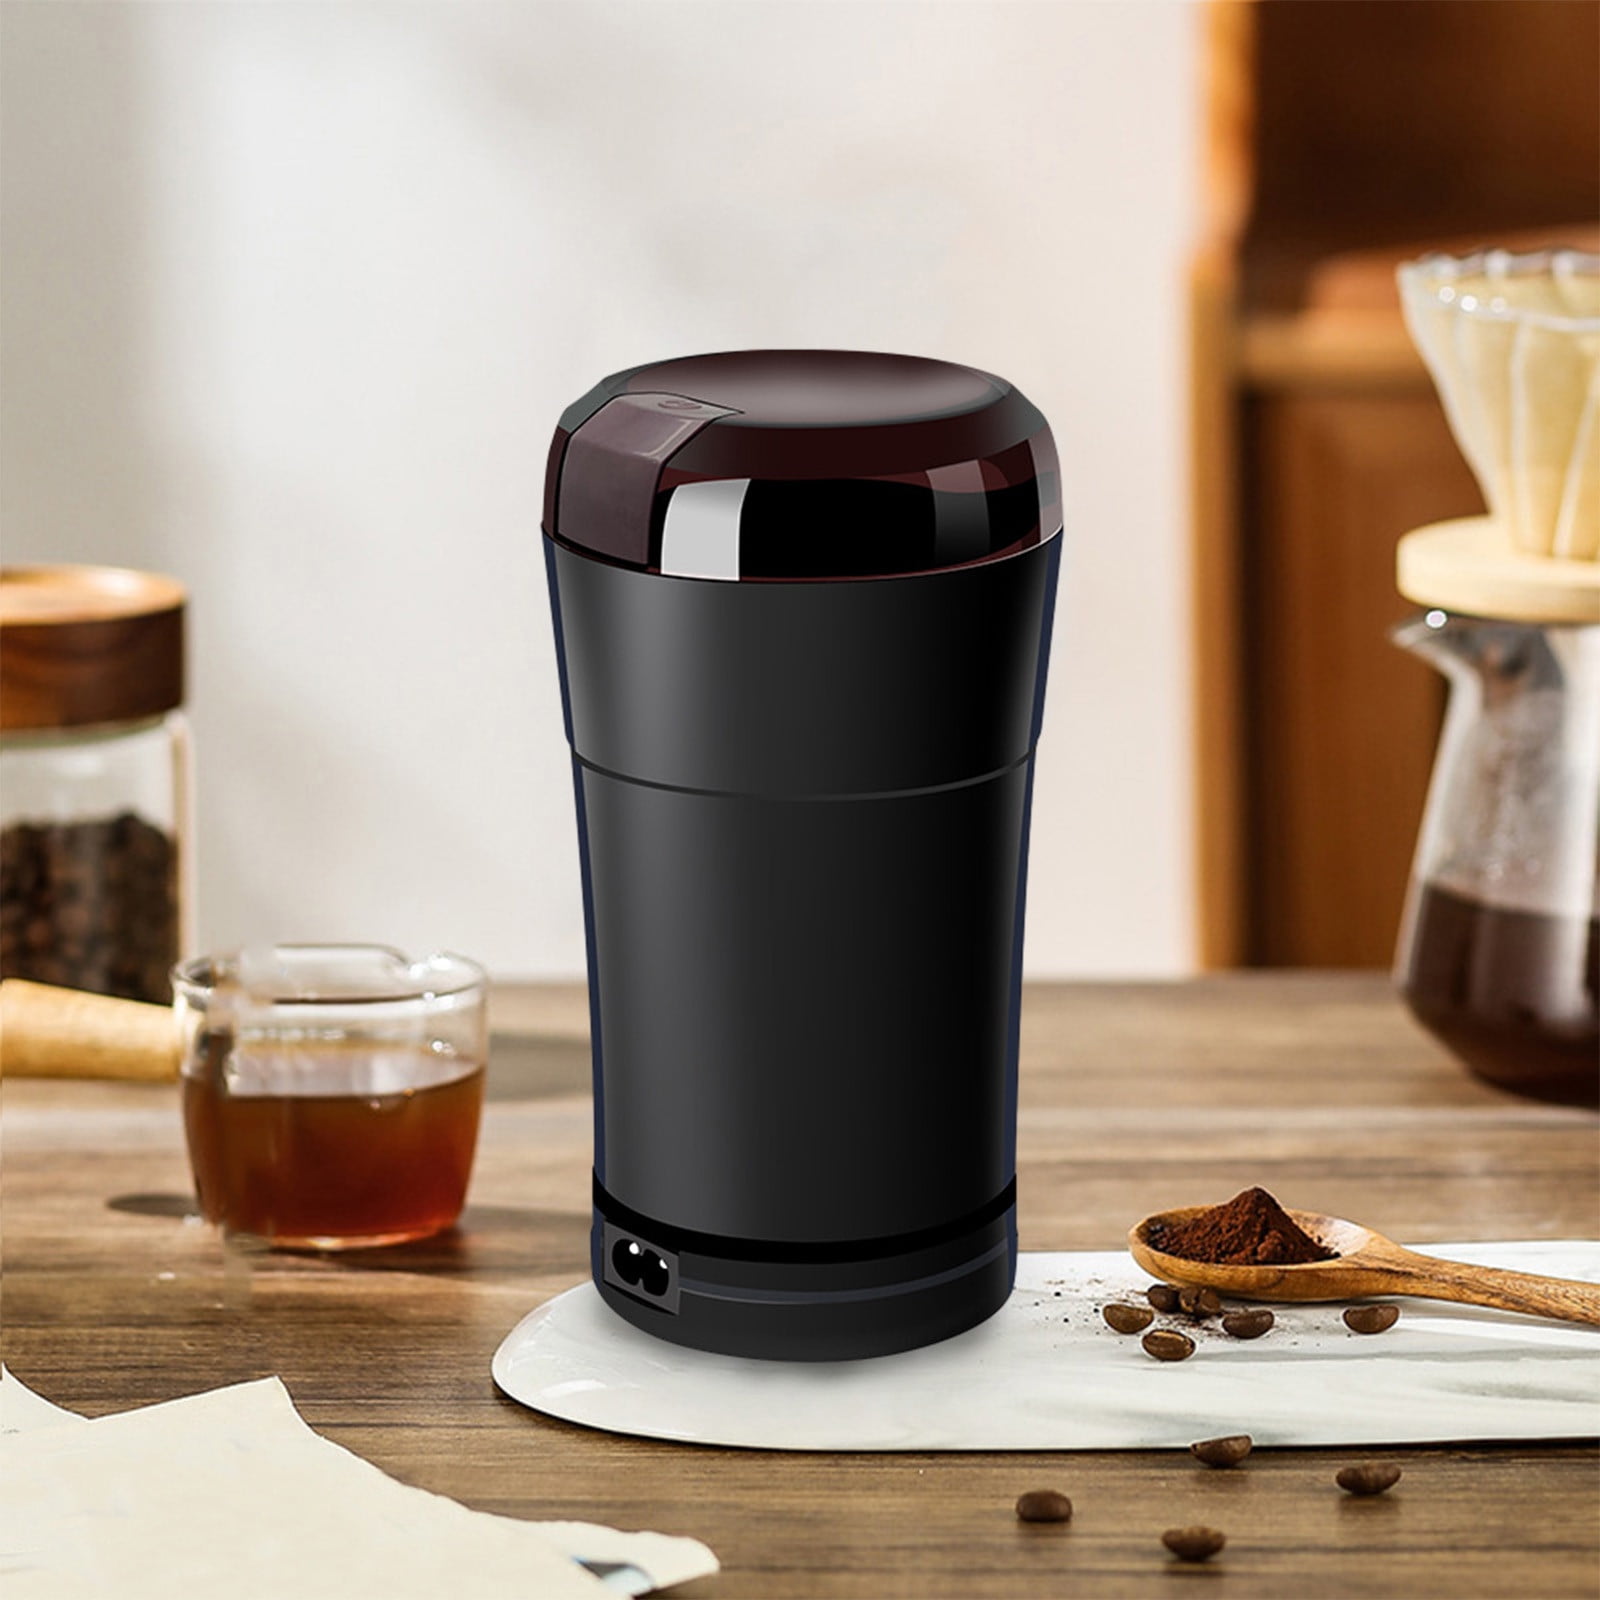 6PT6S85 Mixpresso Electric Coffee Grinder With USB And With Easy On/Off  Button, Spice Grinder For Herbs, Nuts, Grains.